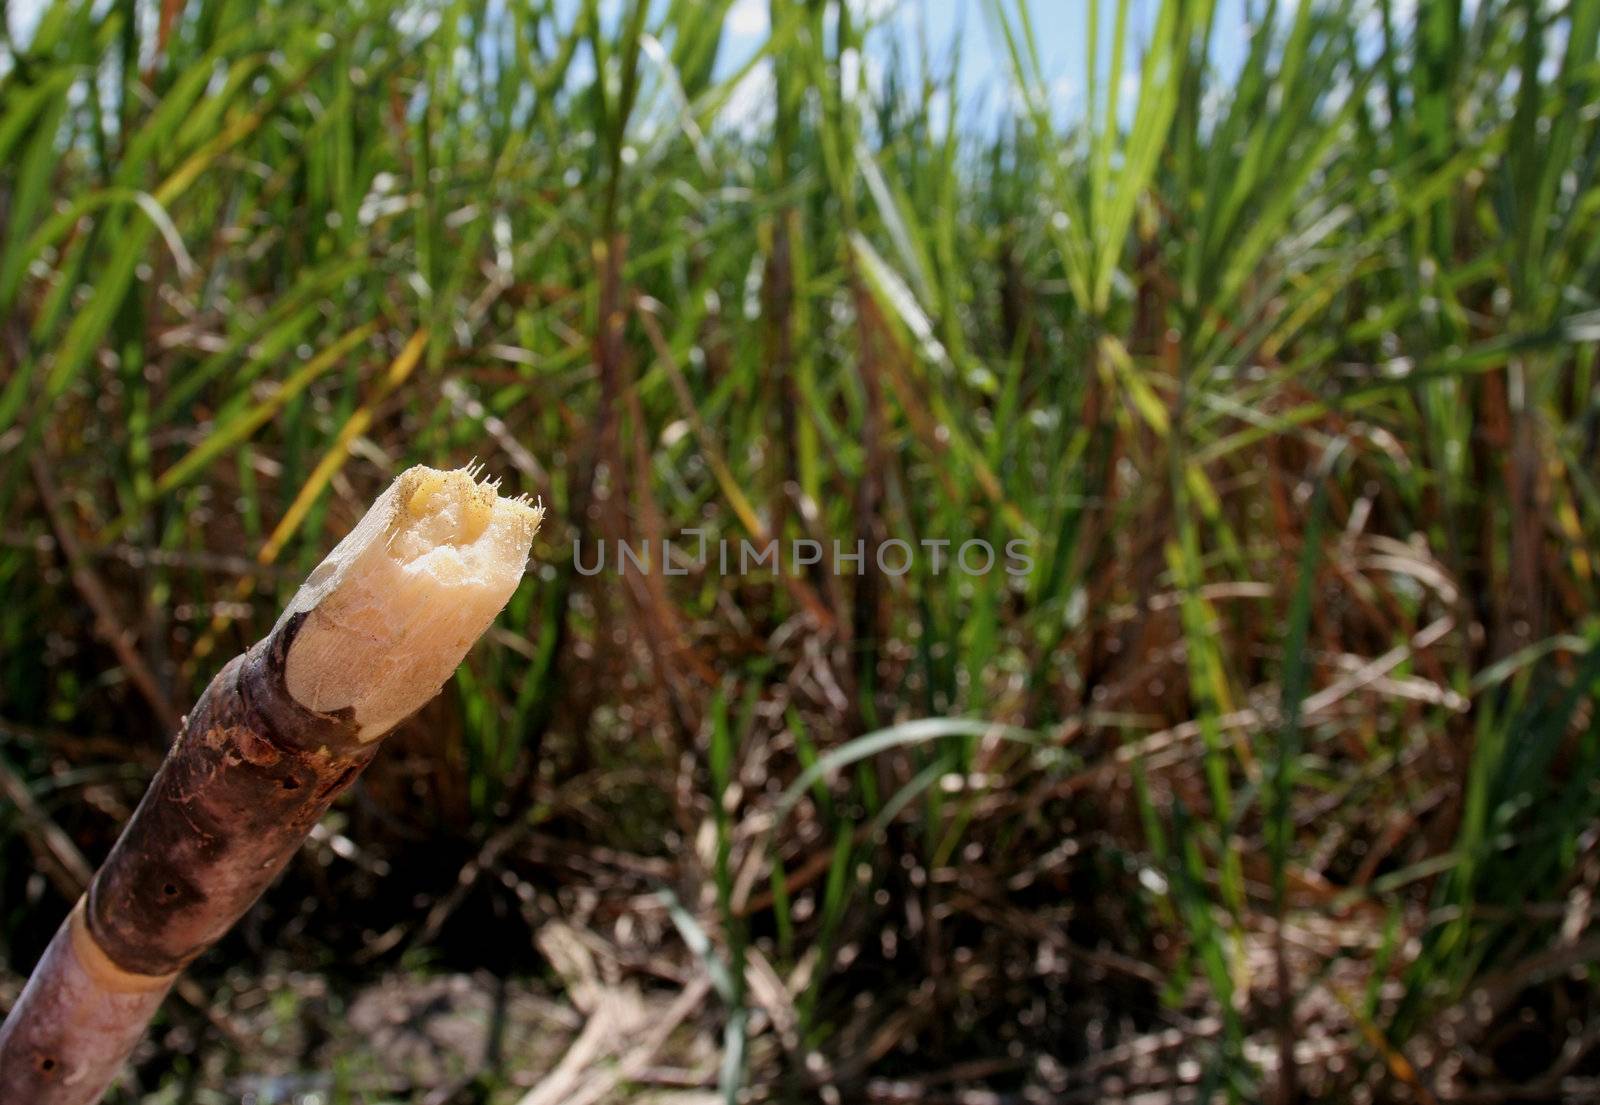 A piece of sugar with a sugar cane field in the background.